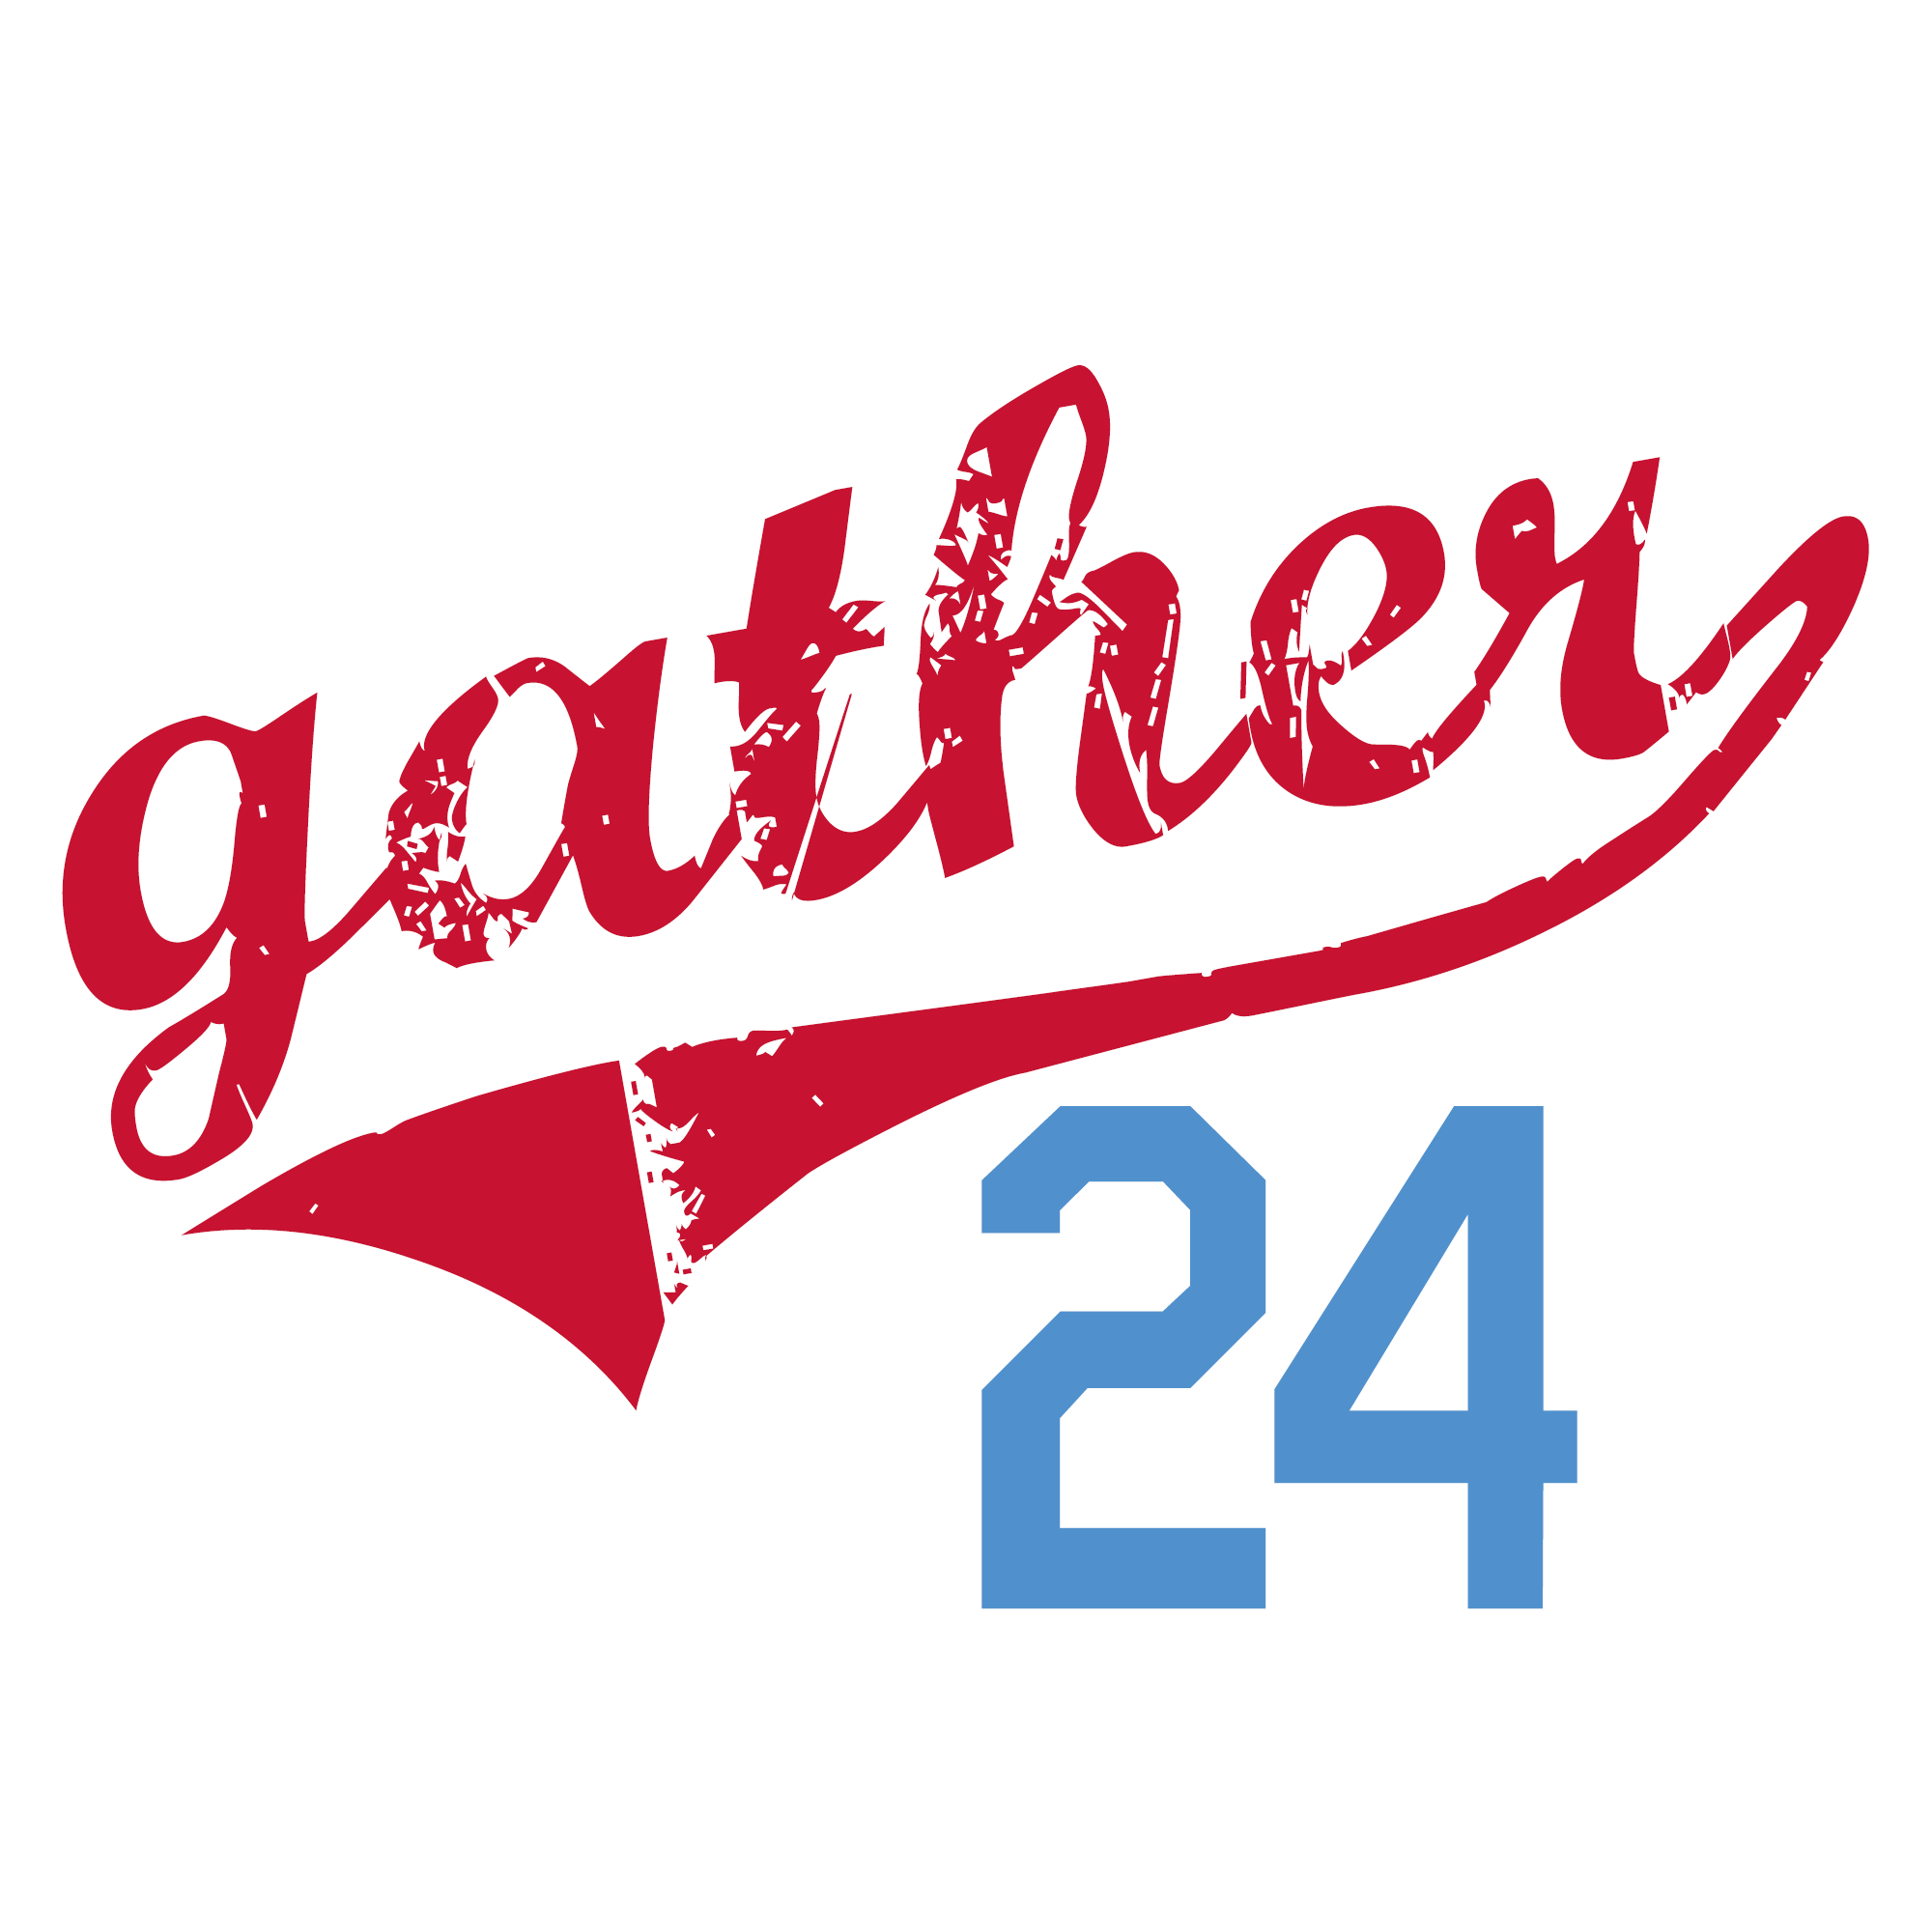 Gather is the Diocese of Bethlehem’s annual formation event.